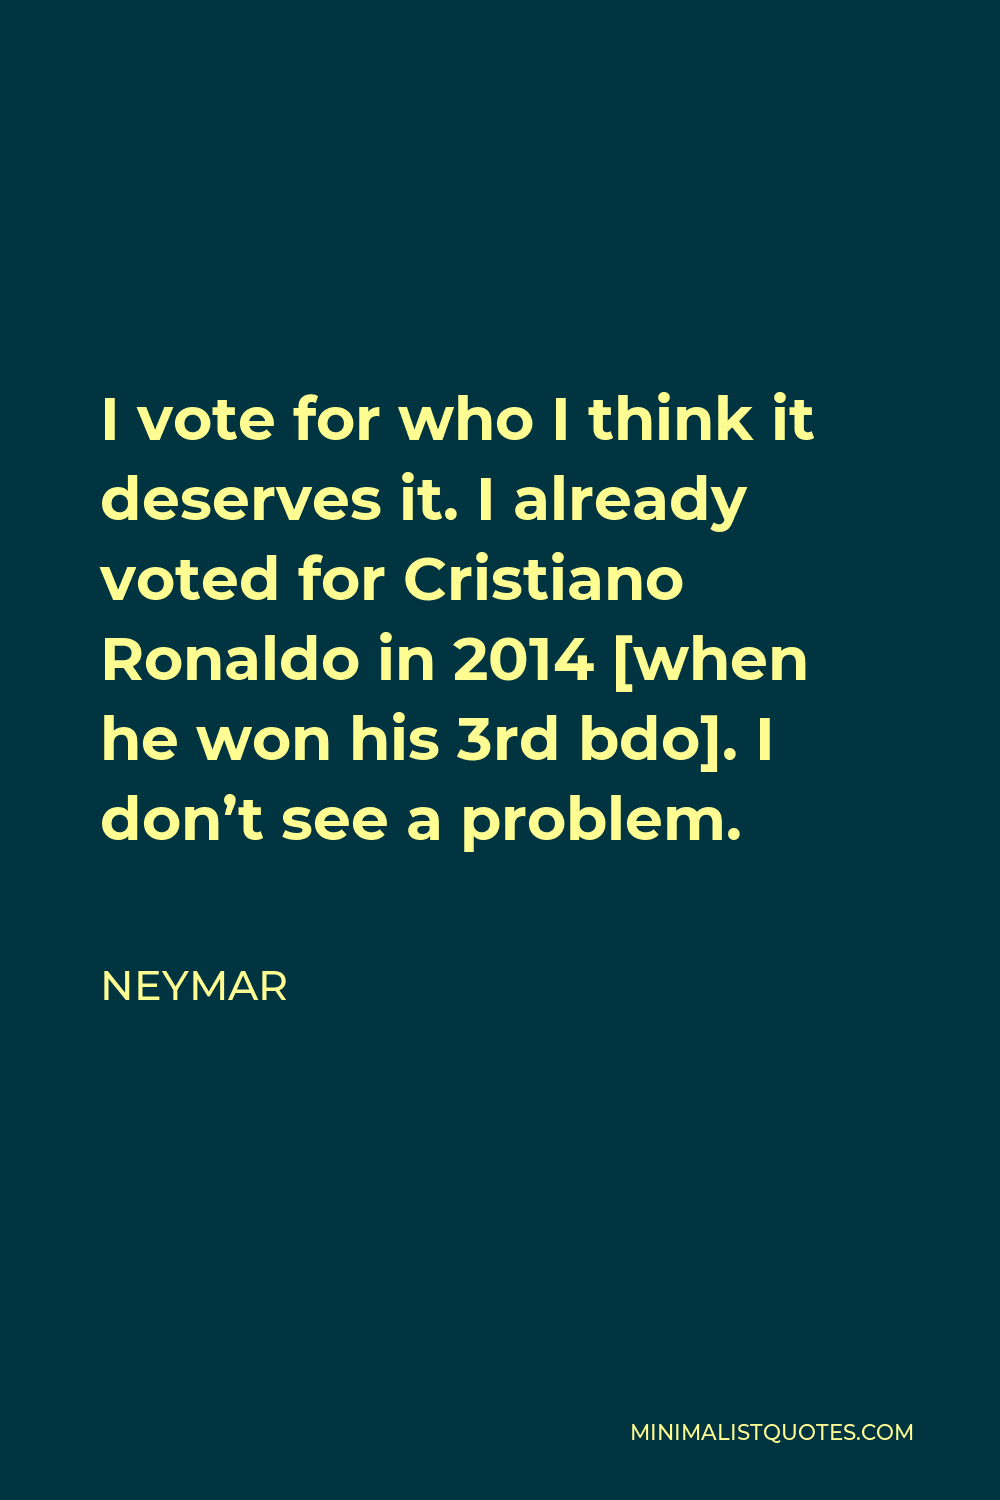 Neymar Quote - I vote for who I think it deserves it. I already voted for Cristiano Ronaldo in 2014 [when he won his 3rd bdo]. I don’t see a problem.